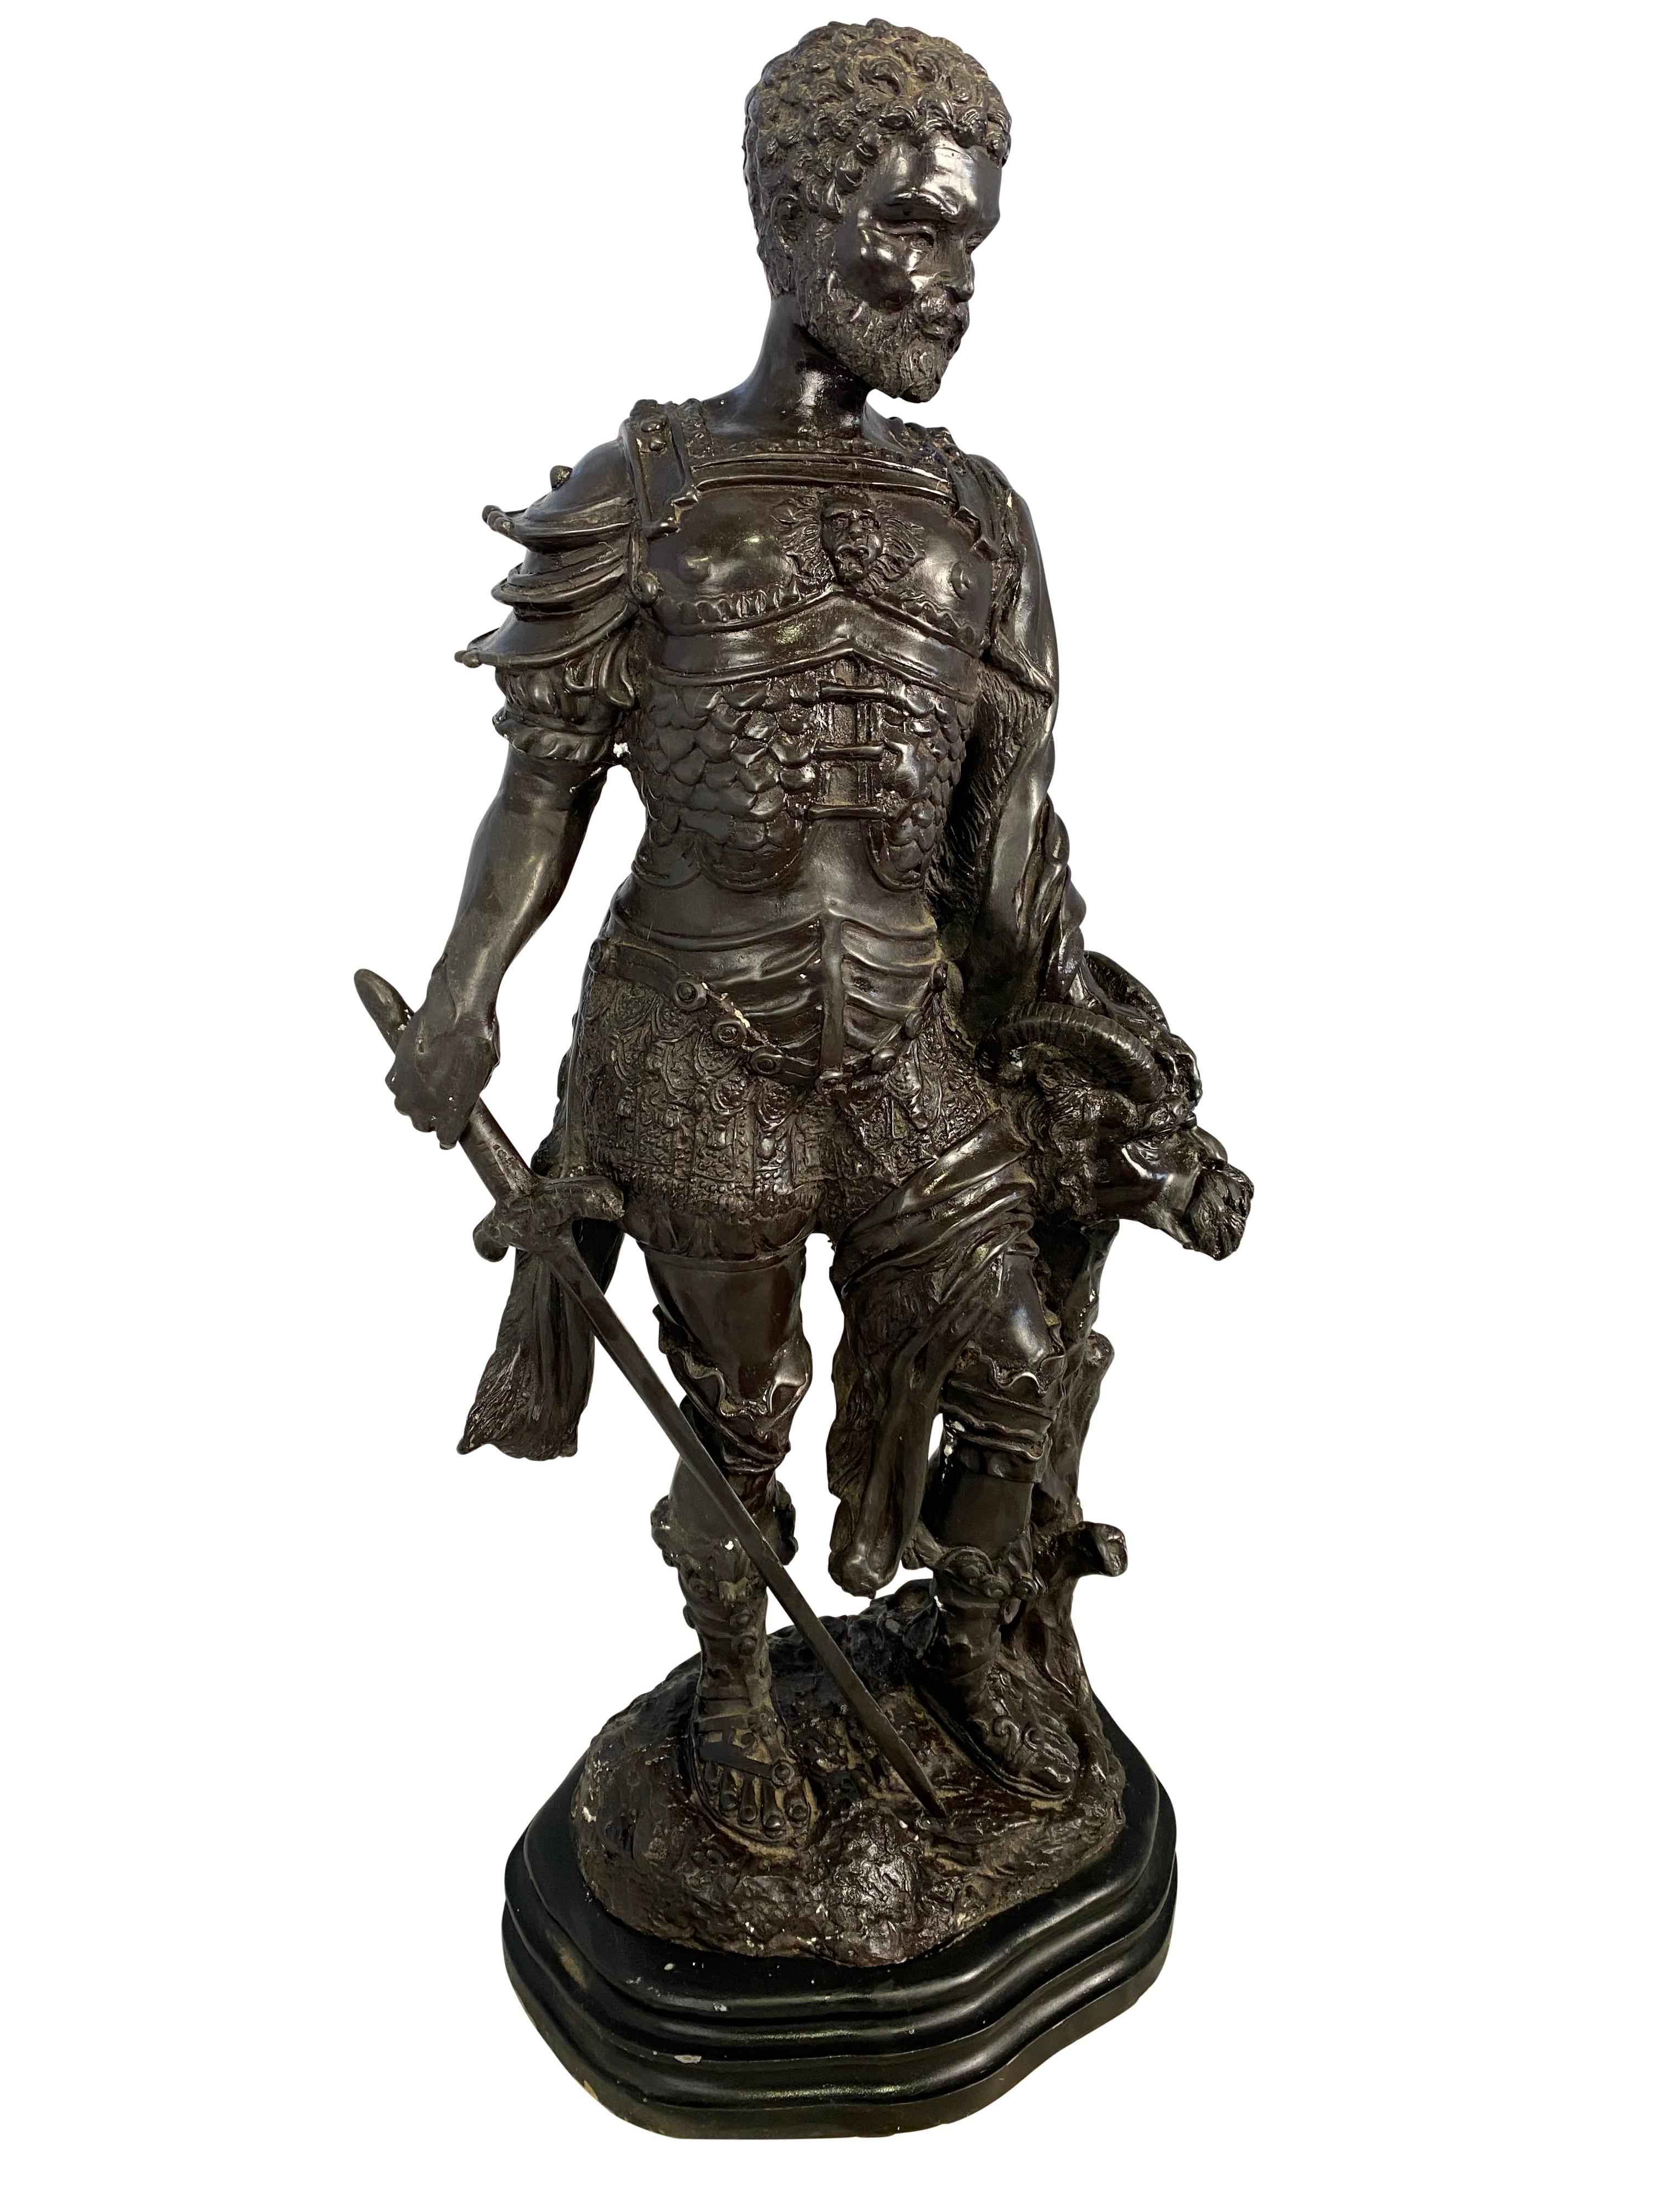 A bronze armoured, bearded warrior stands proud holding his sword in one hand and holding his prize of a Demi-human beast in another. The bronze has exceptional craftsmanship to detail.

Dimensions: (cm)
63 H/32 W/20 D.